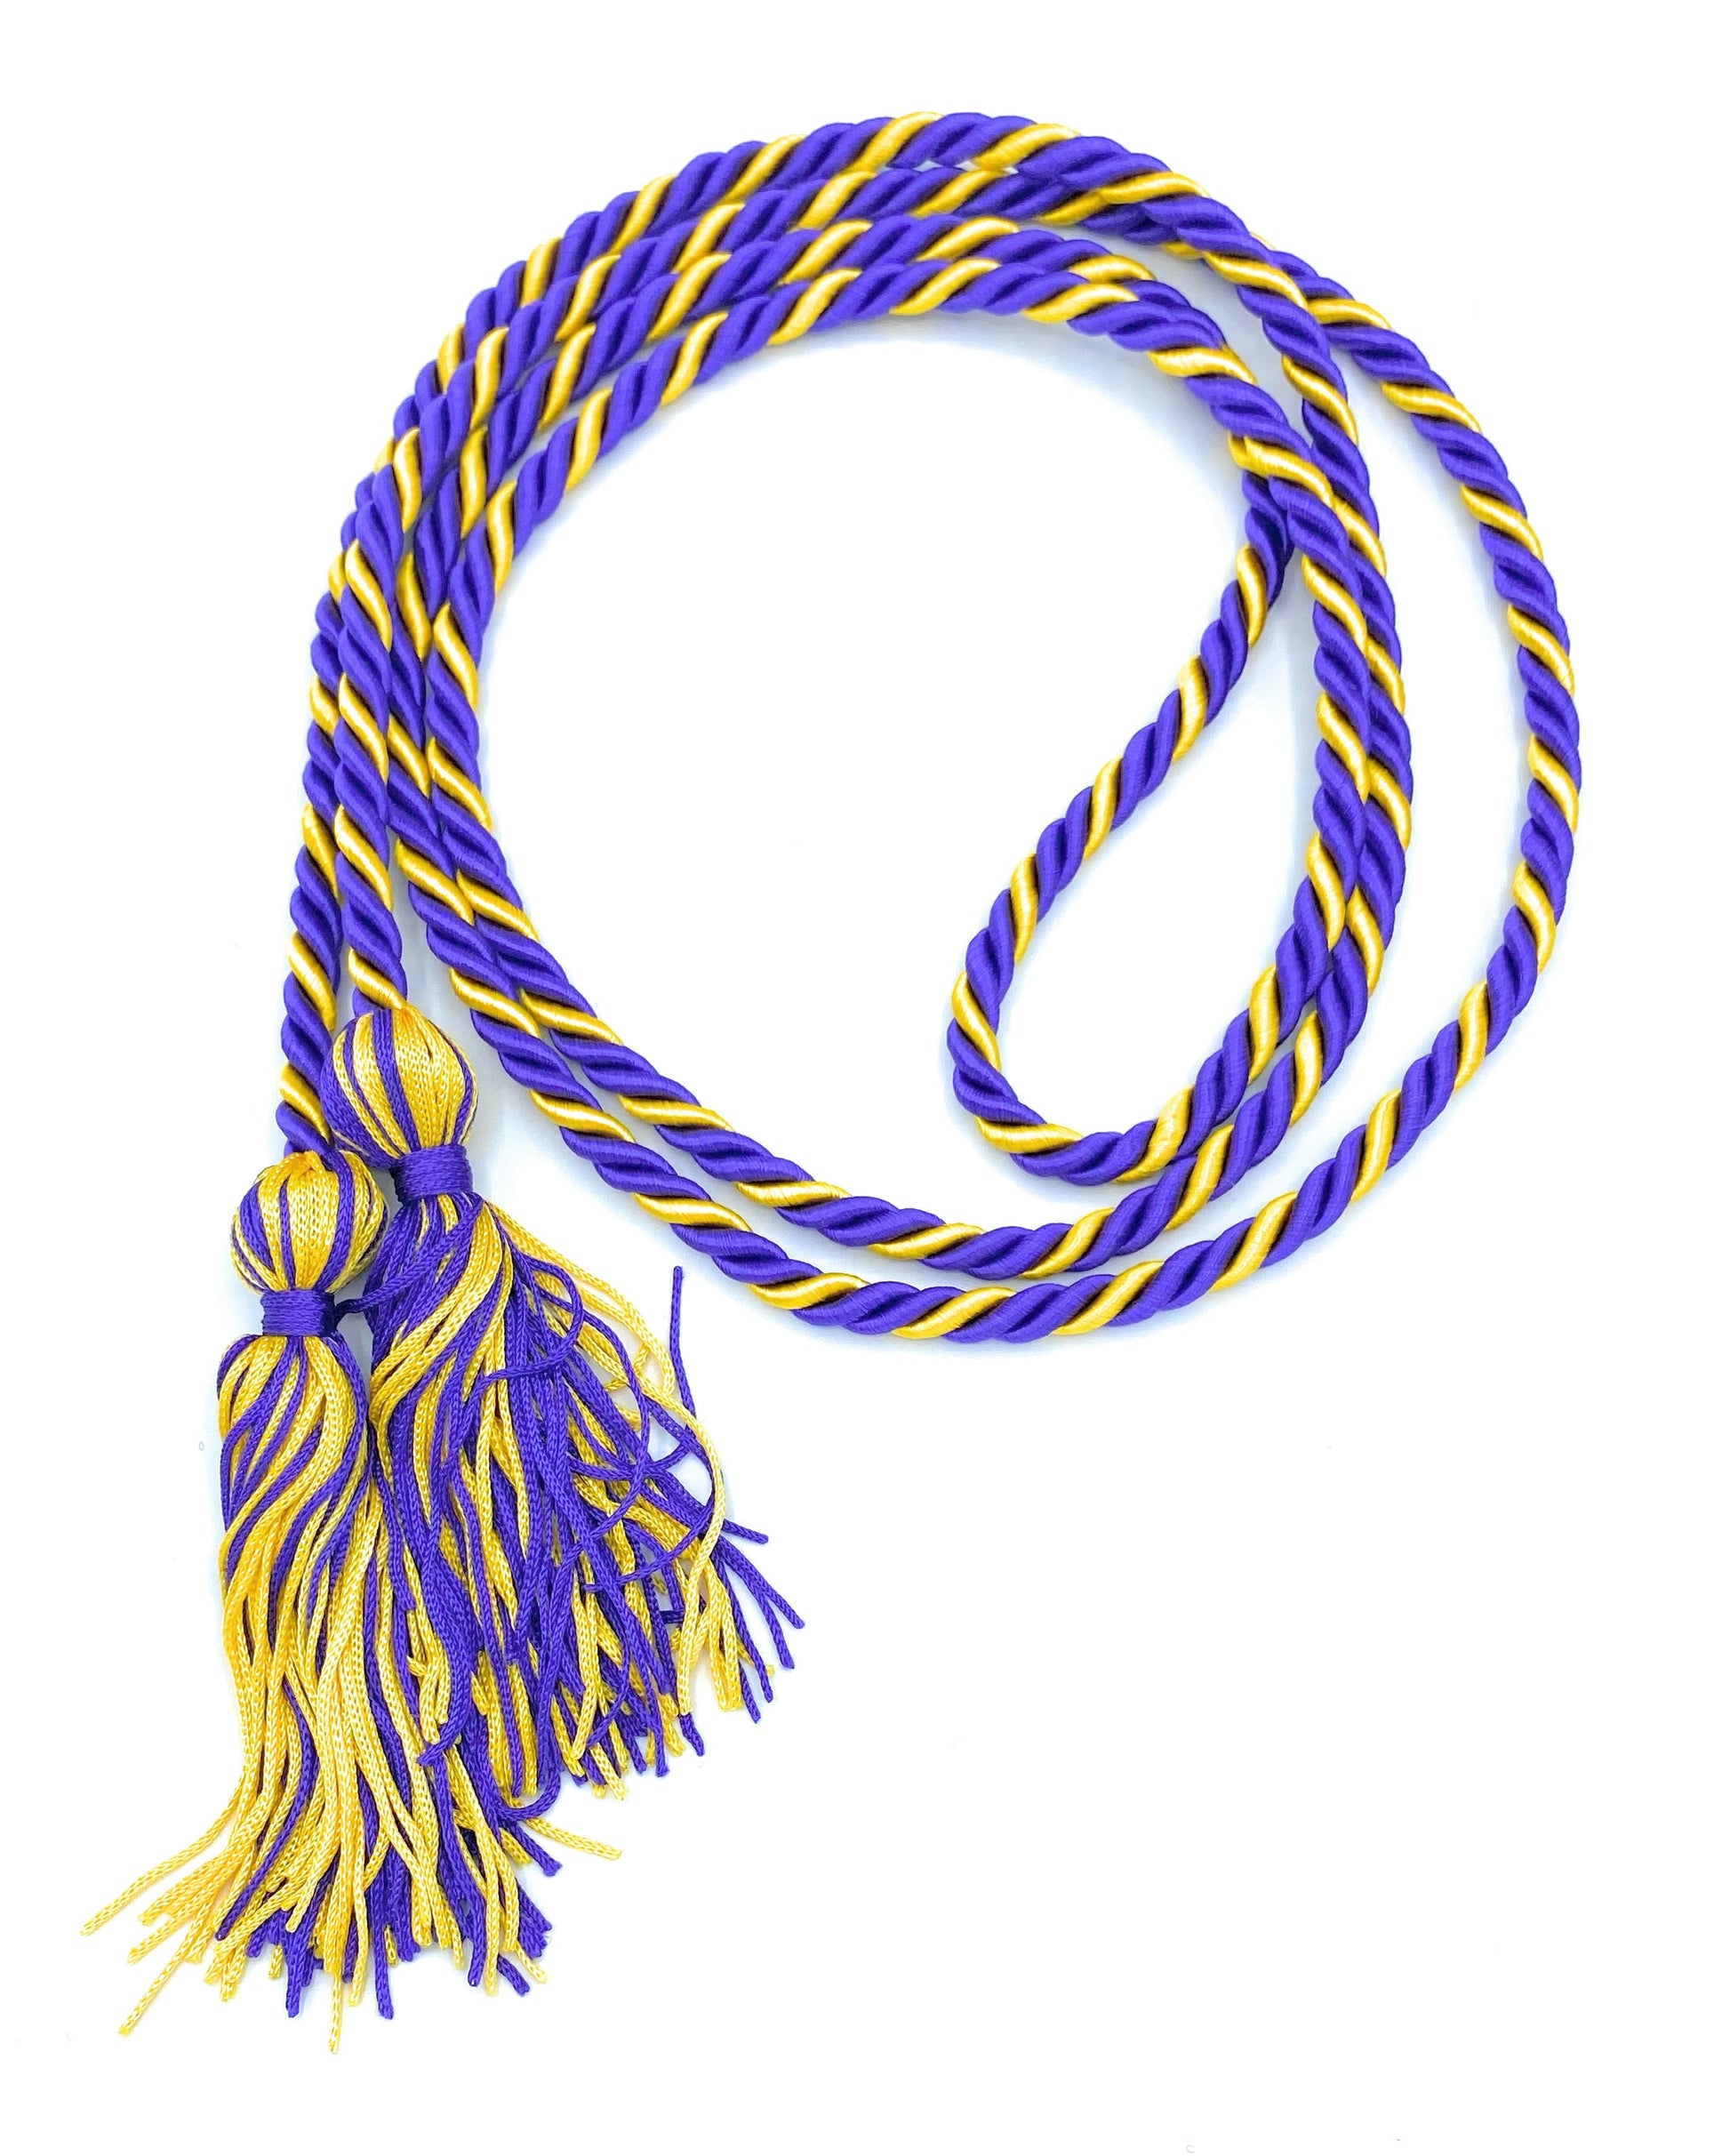 Purple/Gold Honor Cords - Honor Cord Source 